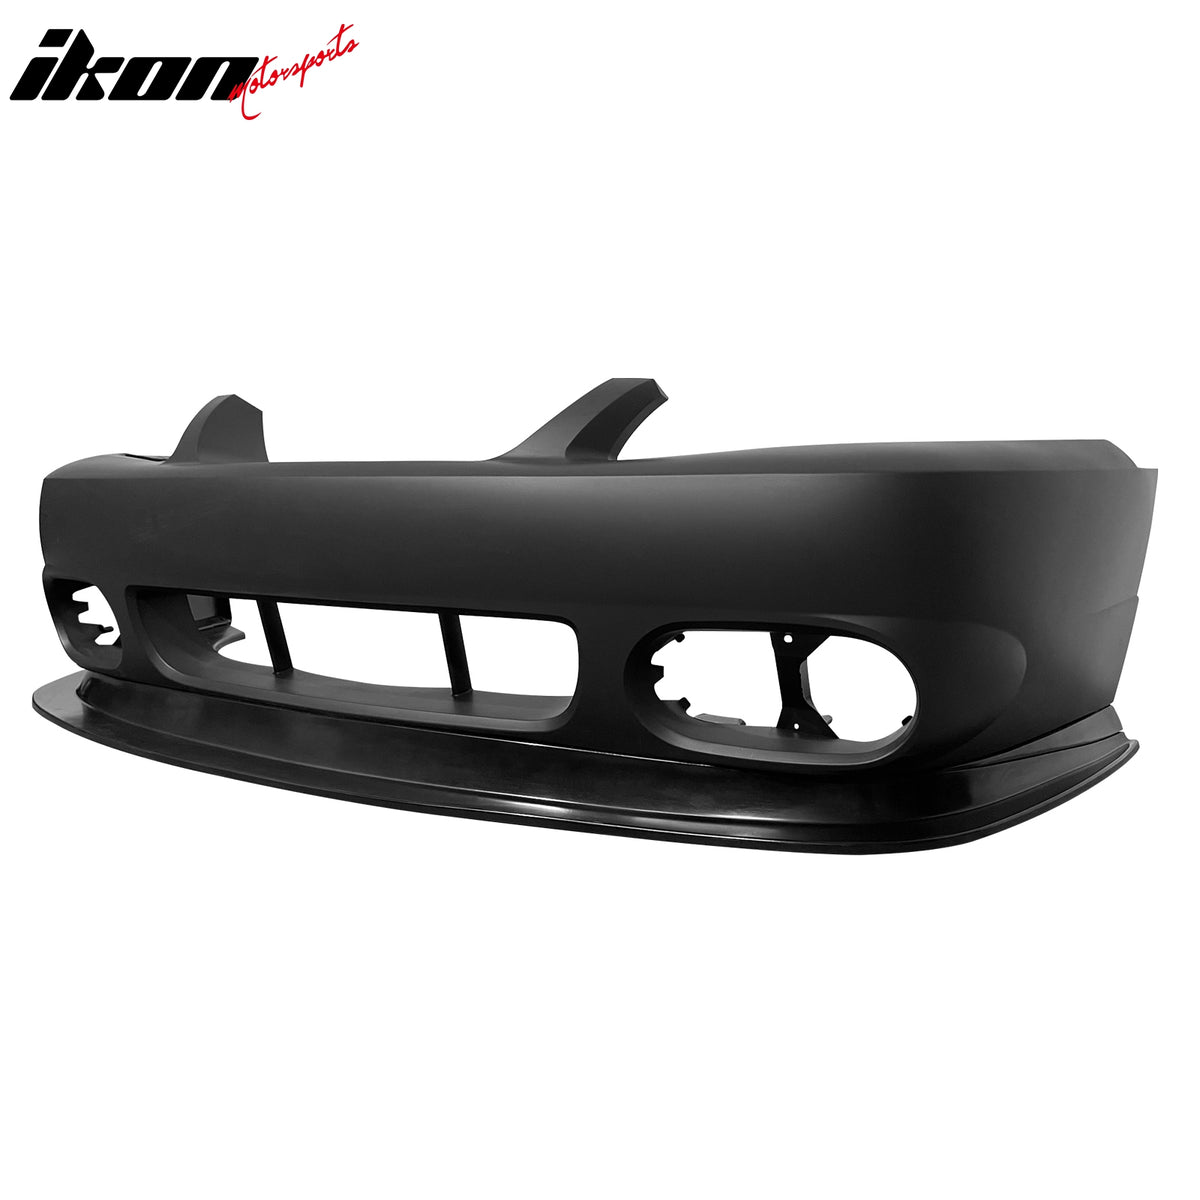 Fits 99-04 Ford Mustang MDA Cobra Style Front Bumper Cover Conversion W/ Lip PU